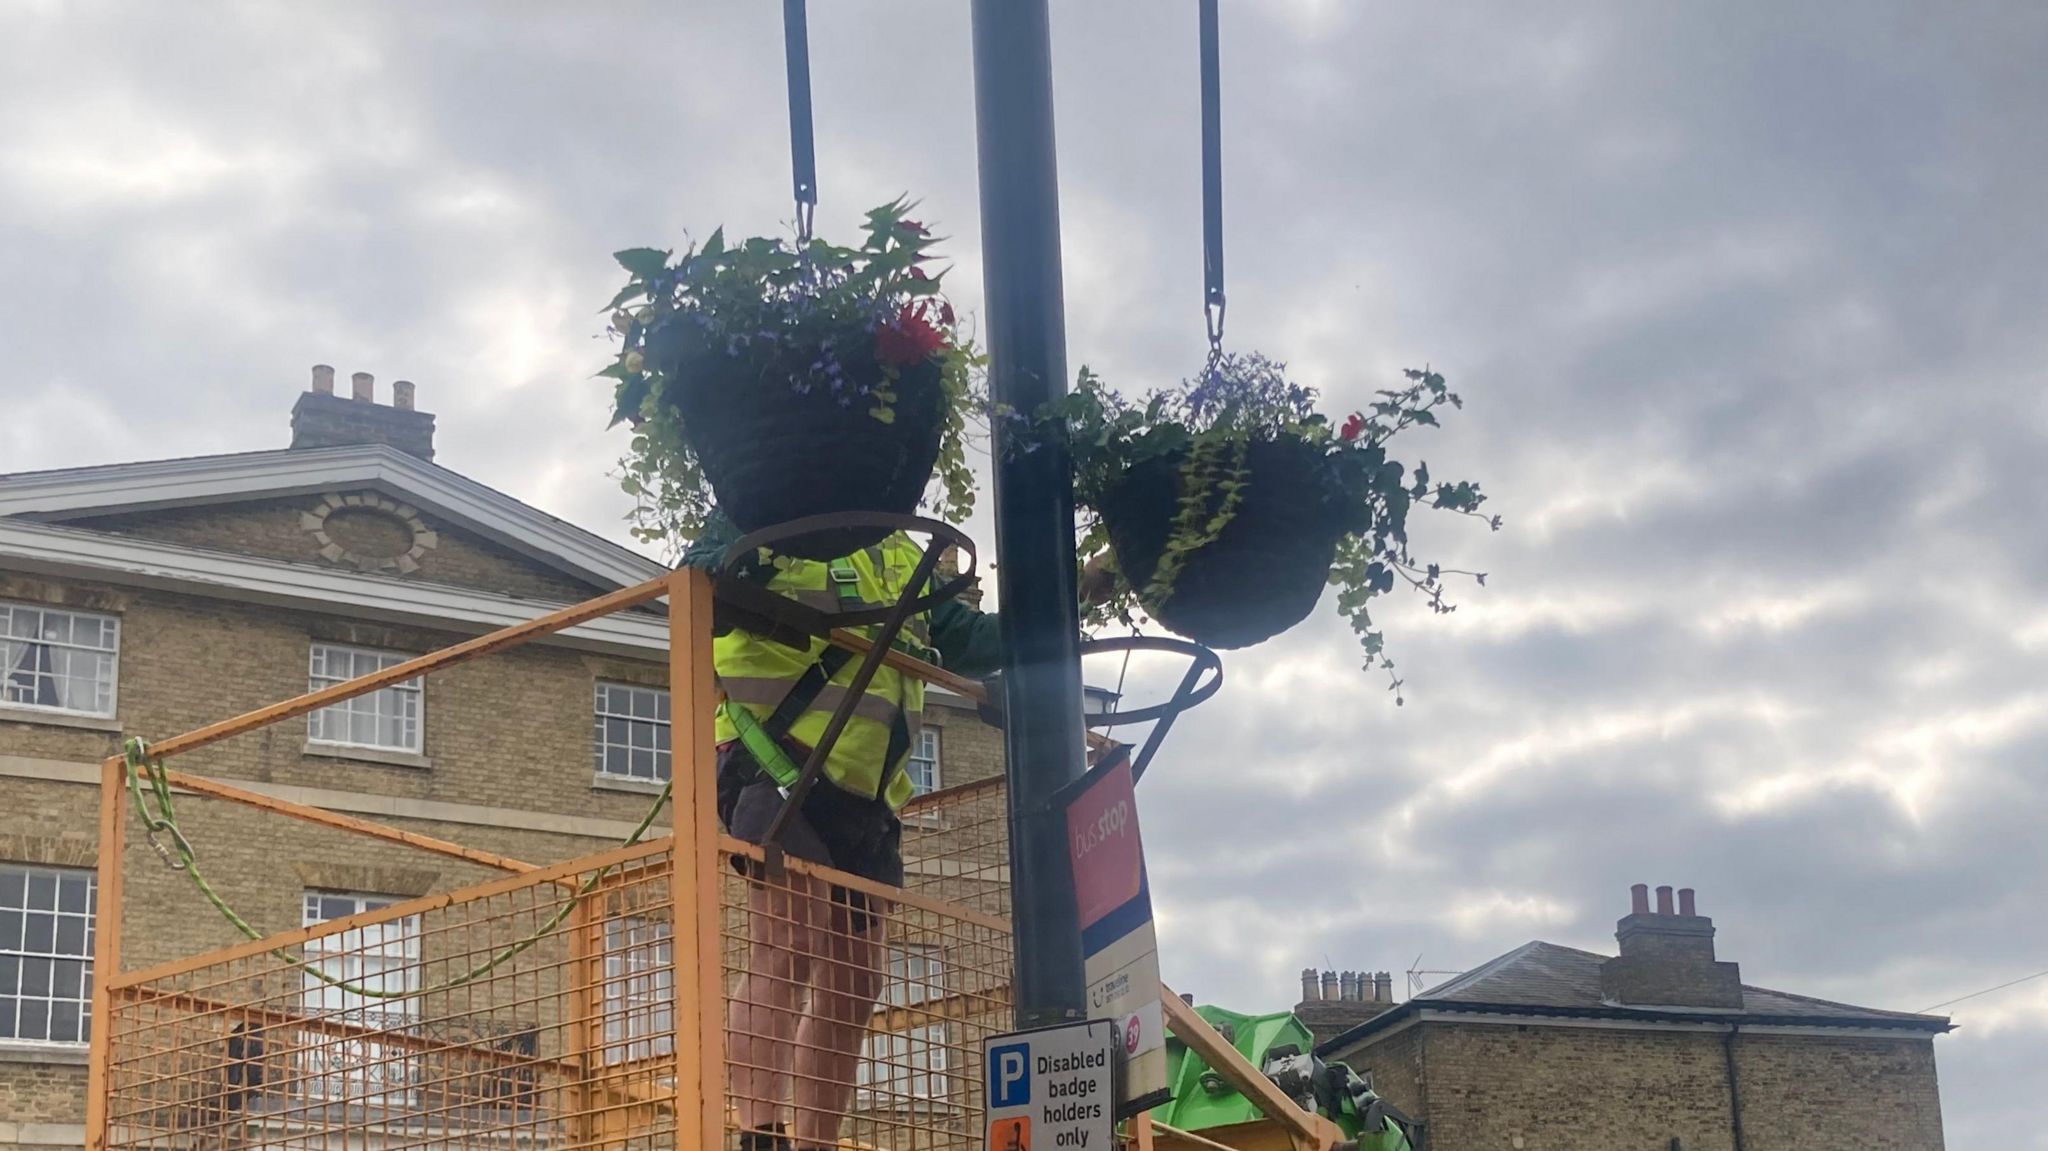 Hanging baskets being placed on street lamps by a person in a high-visibility jacket